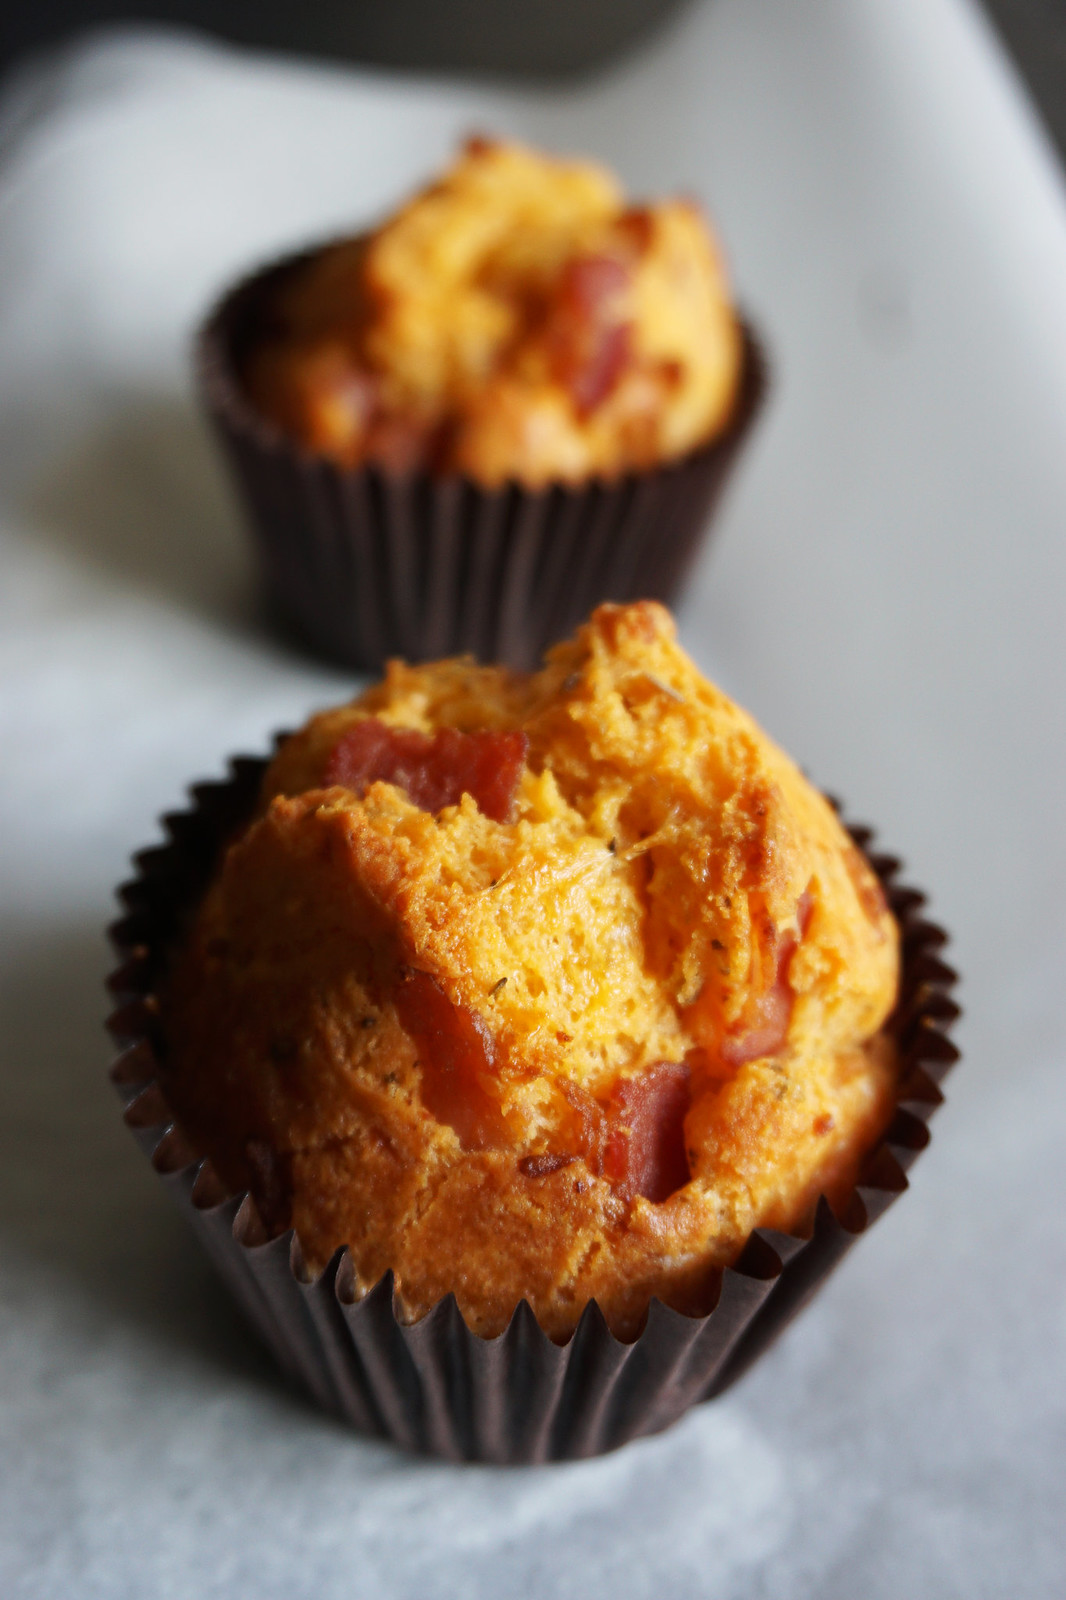 Breakfast gluten free bacon cheese muffins made with Doves Farm self raising flour